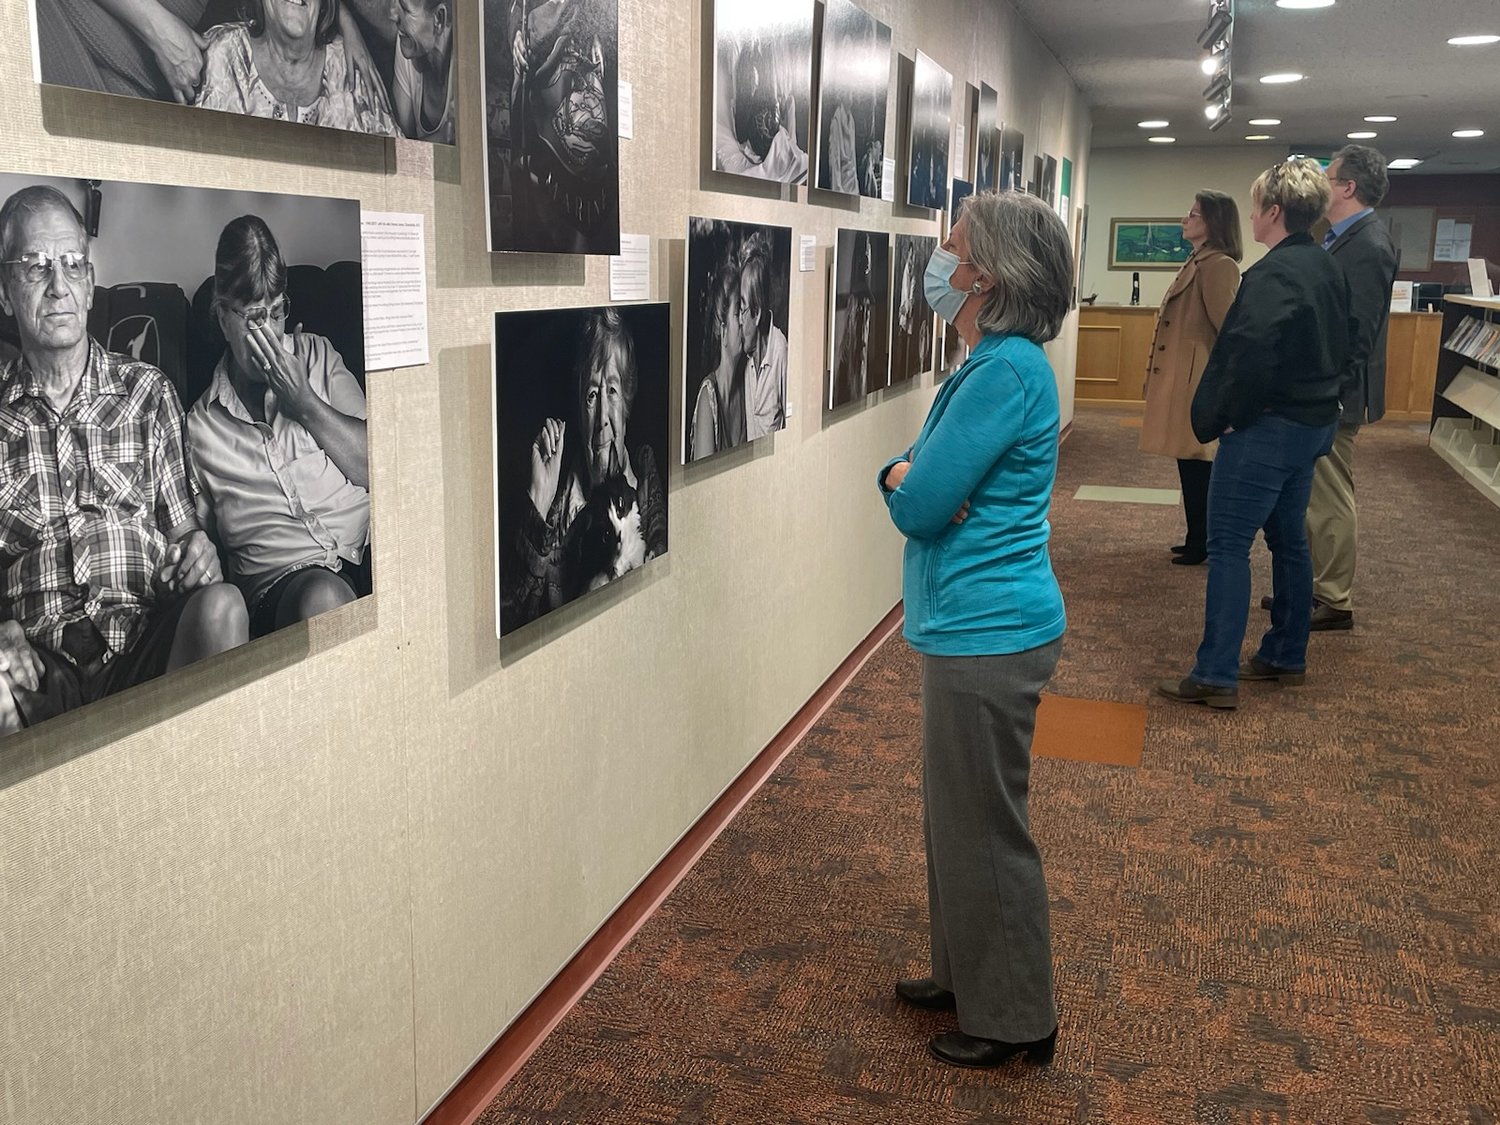 Vistors reflect on the photos and quotes of former hospice patients included in The Last Portrait exhibit open now through April 11 at SUNY Morrisville.